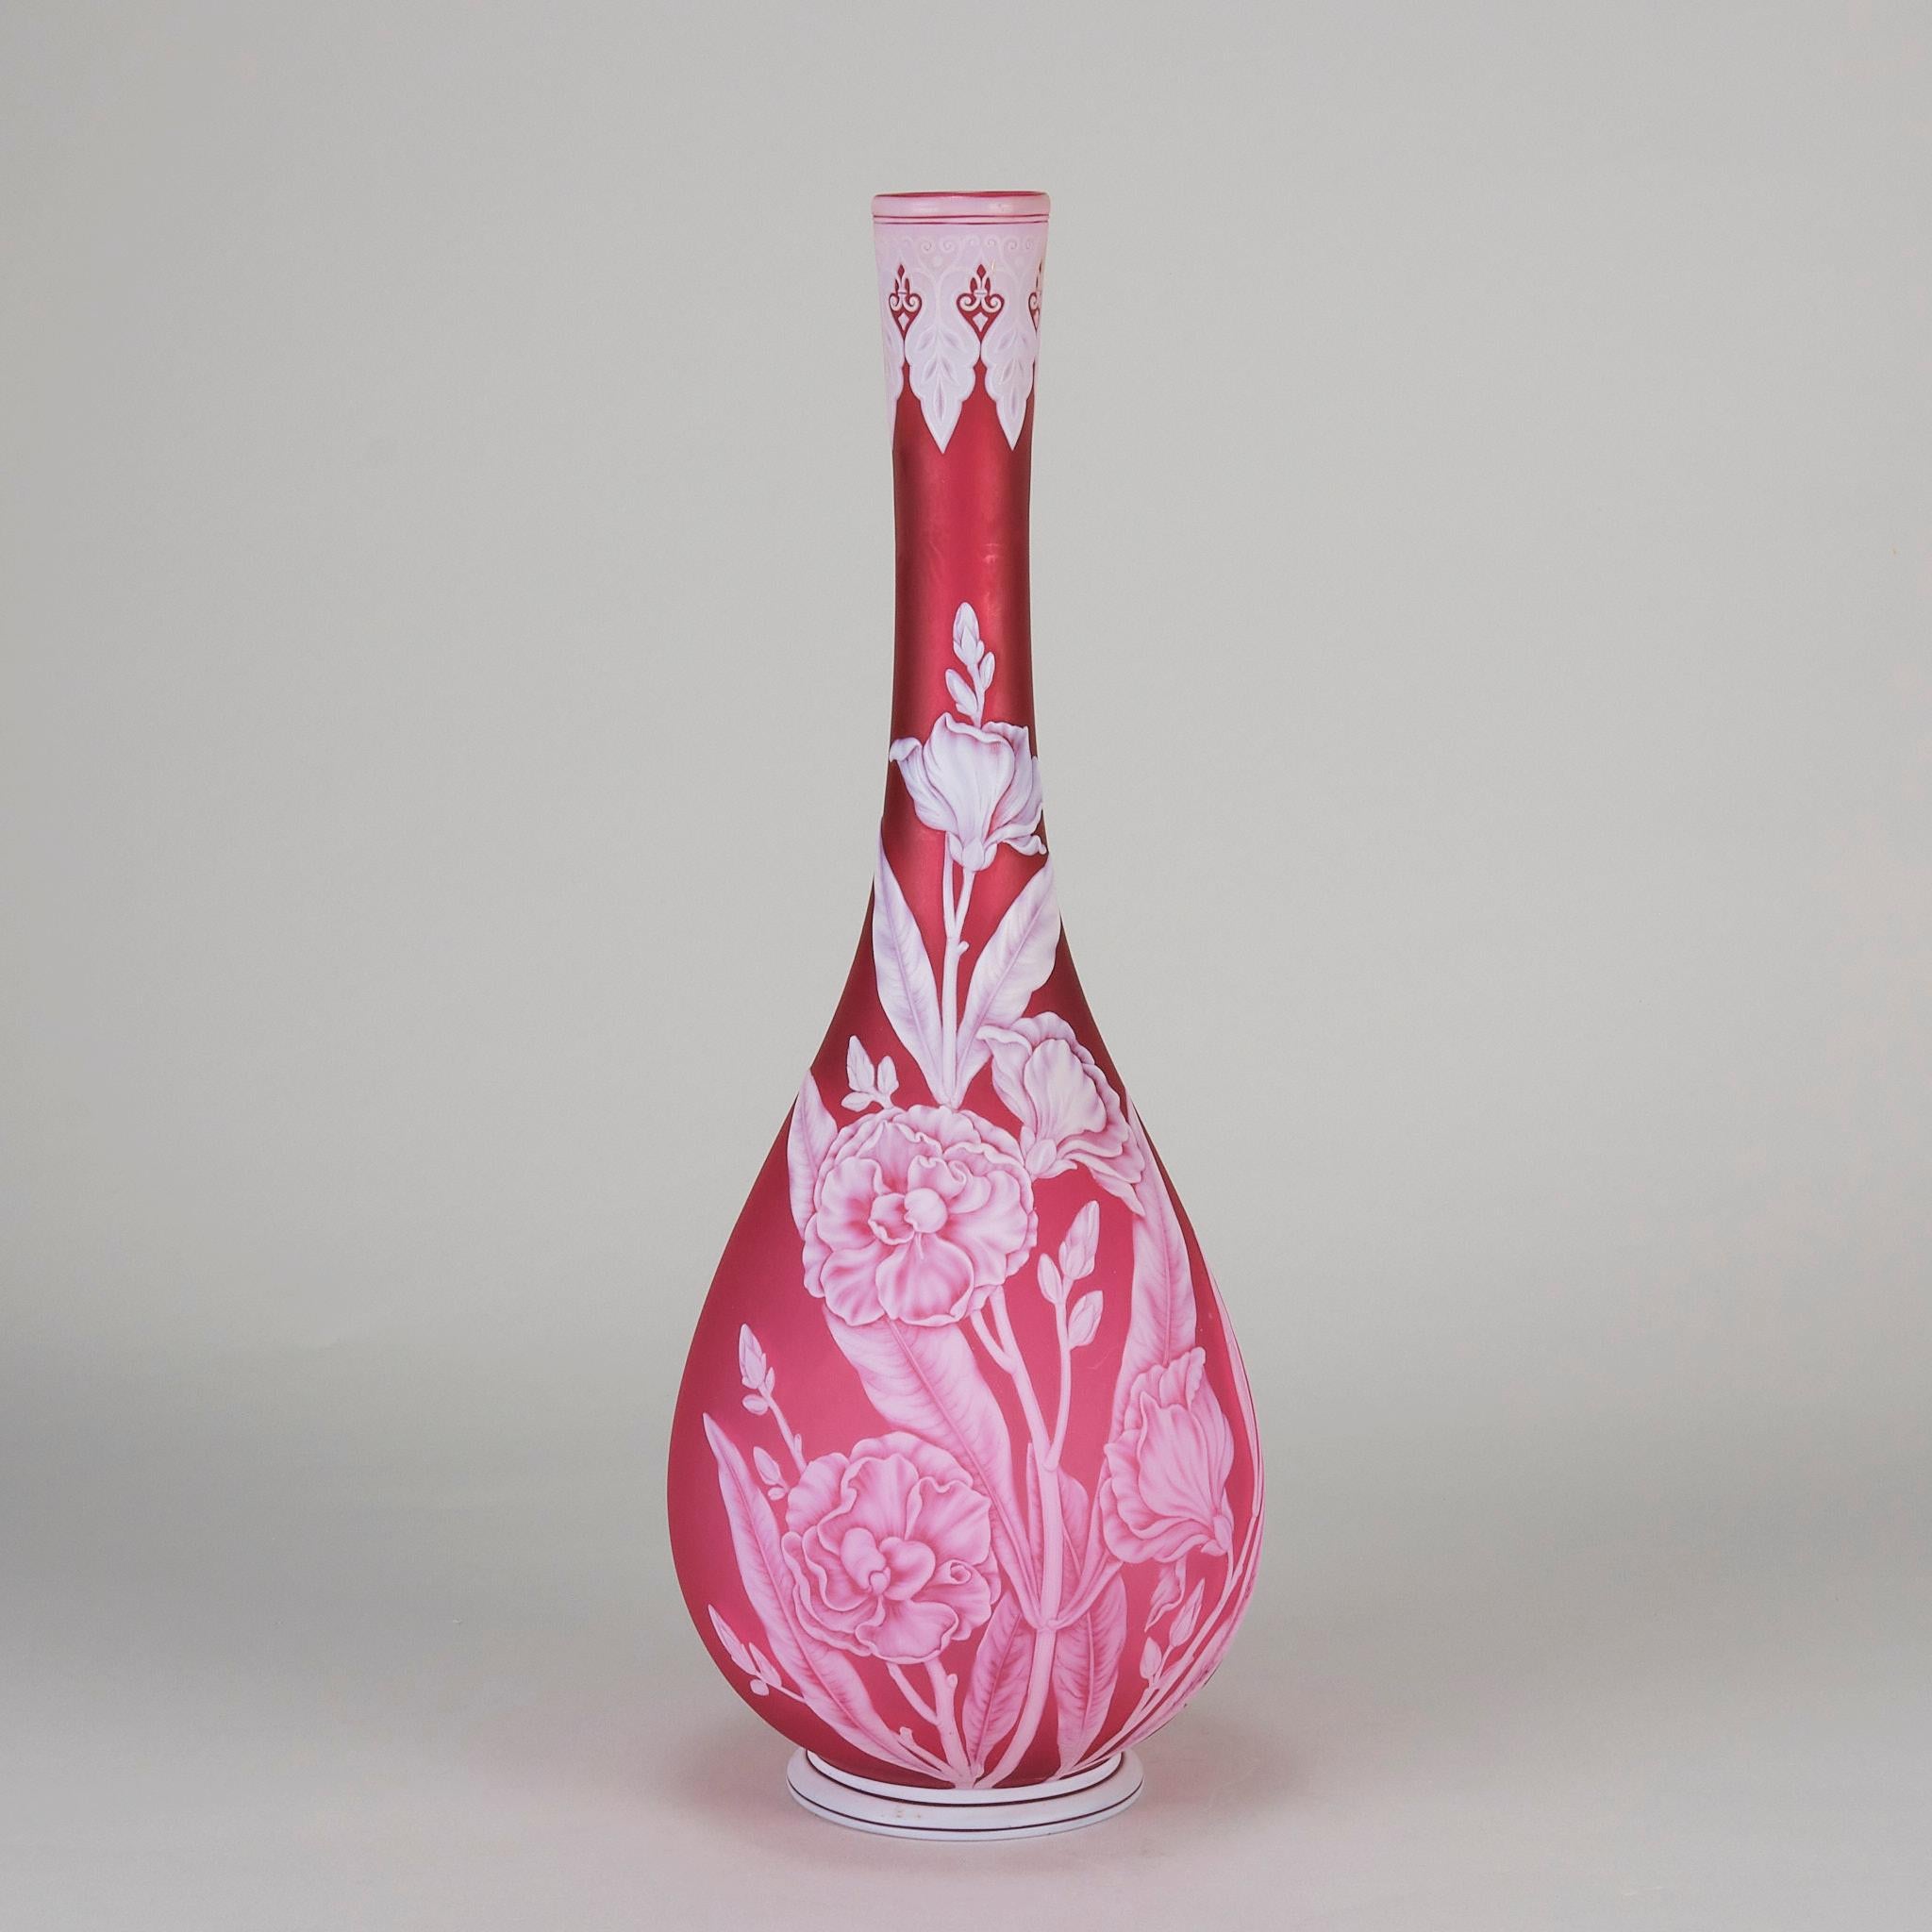 A dramatic late 19th Century red decorative glass vase with white cameo casing cut through with a beautiful landscape of blossoming Oleander flowers and a flying butterfly. Signed to base Oleander representing the series of plant and flower vase